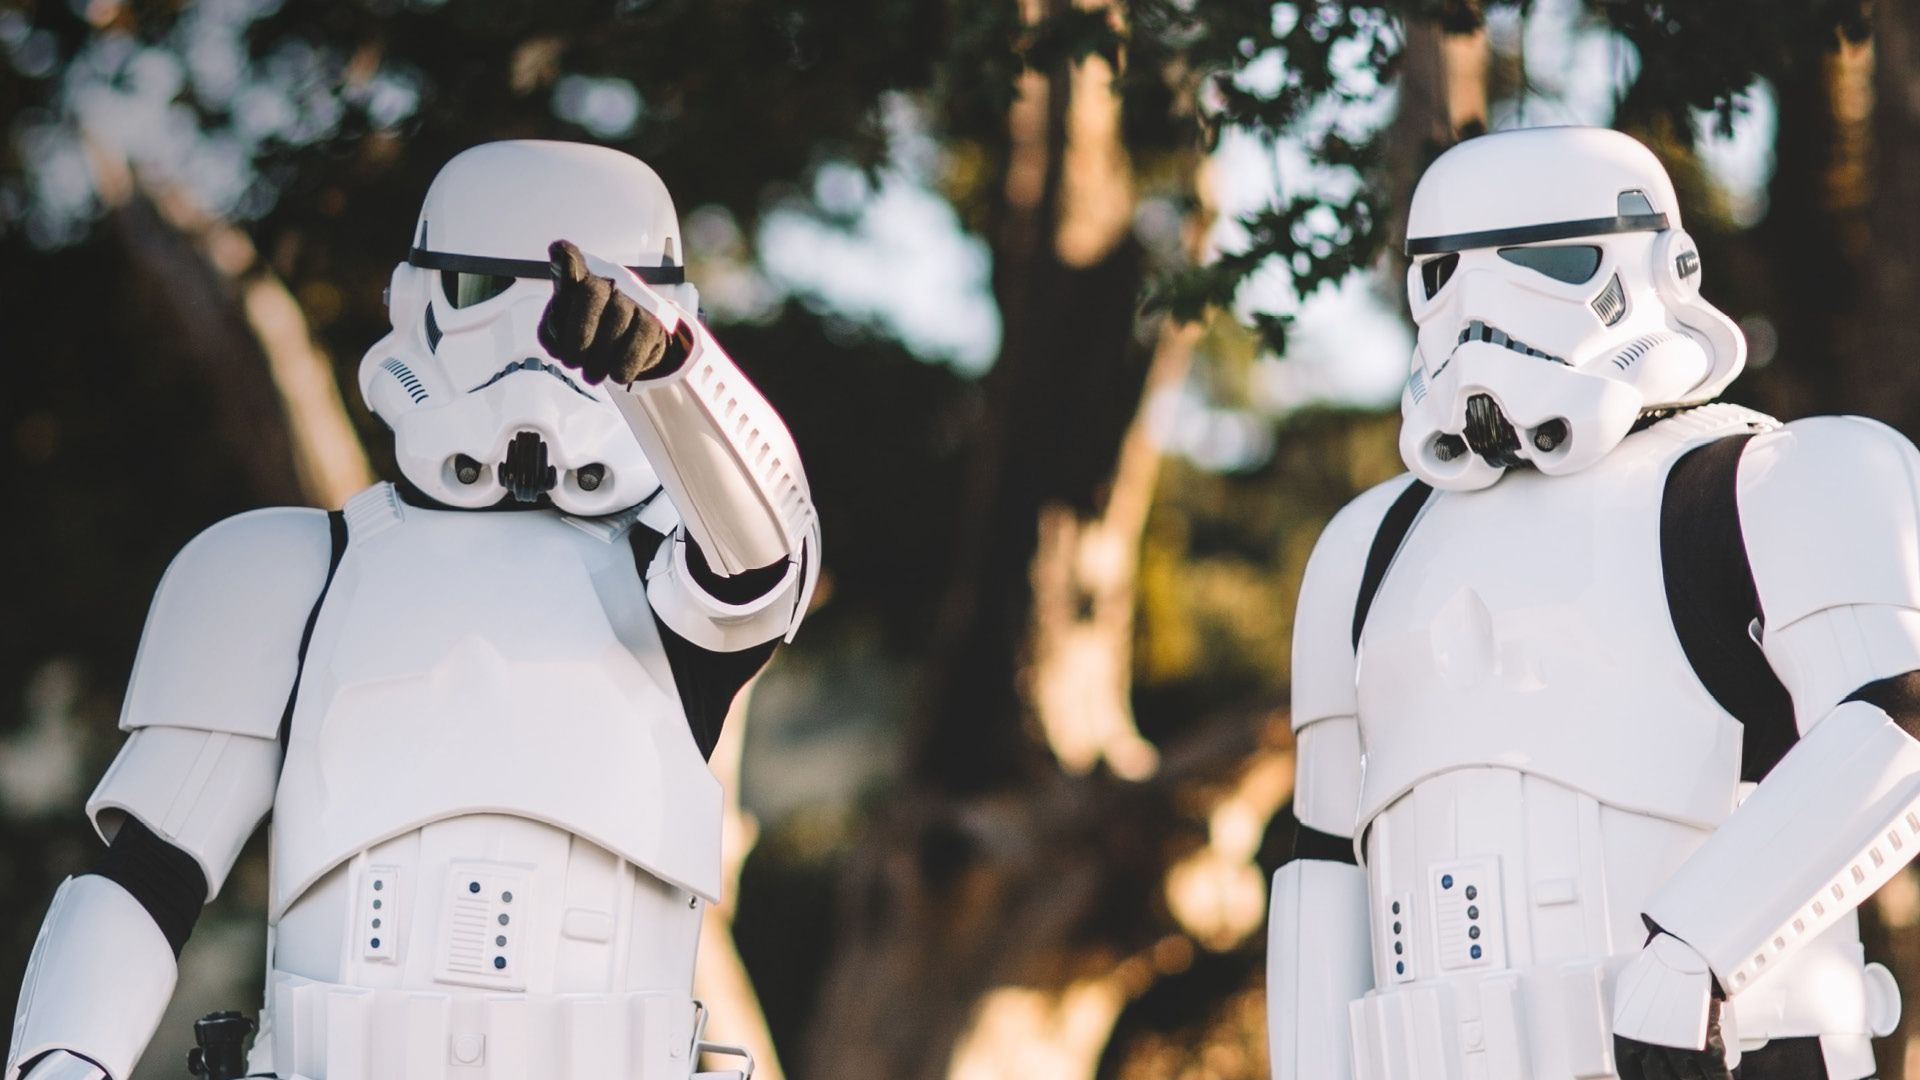 Two people dressed up as Storm Troopers.